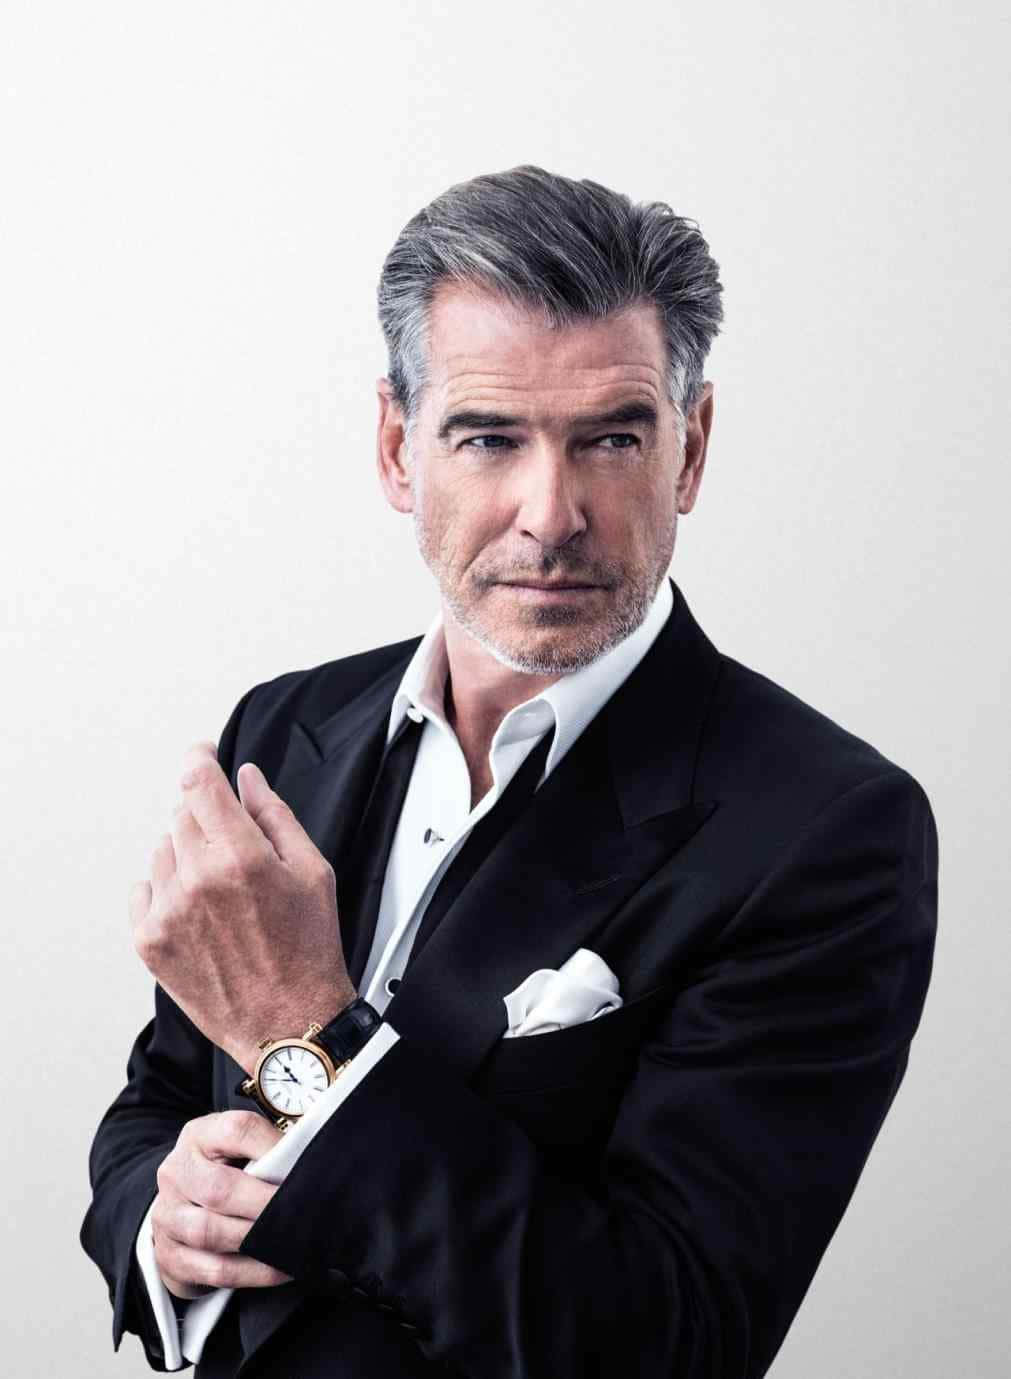 Pierce Brosnan Looking Handsome In A White Shirt And Sunglasses. Wallpaper